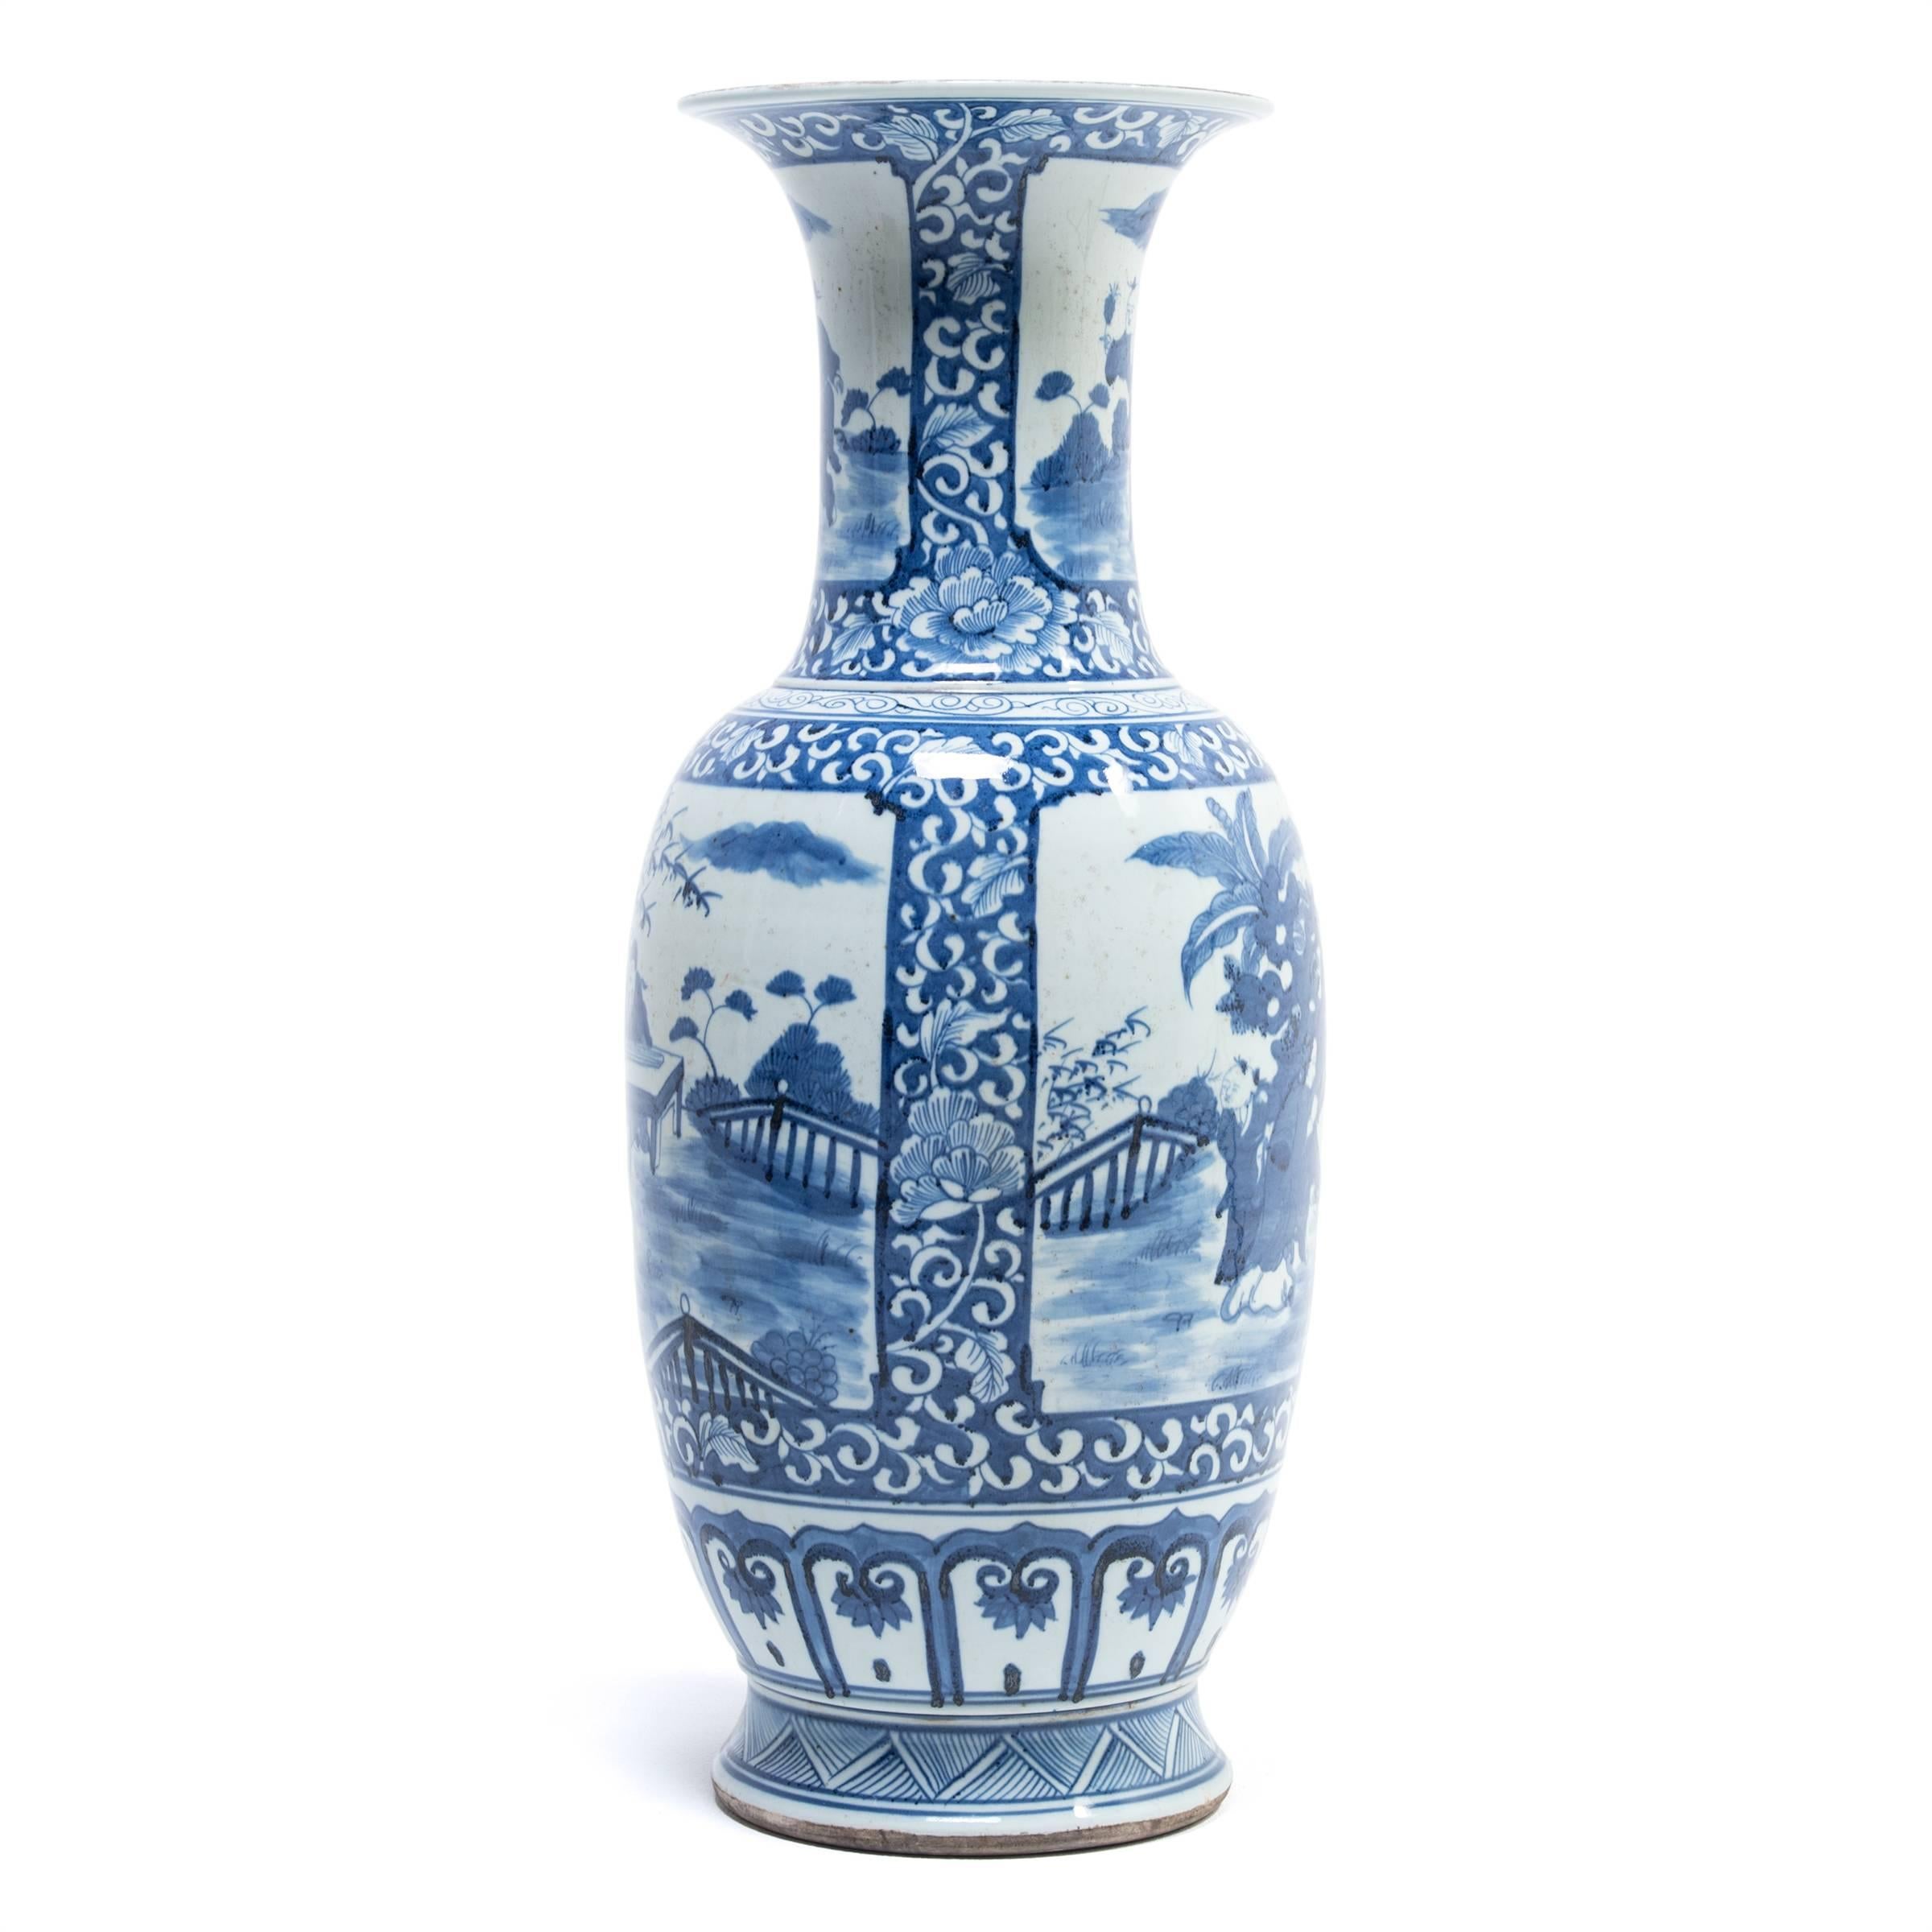 Chinese blue-and-white ceramics have inspired ceramists worldwide since cobalt was first introduced to China from the Middle East thousands of years ago. This contemporary vase from Jiangxi province takes a traditional curved shape emulating the